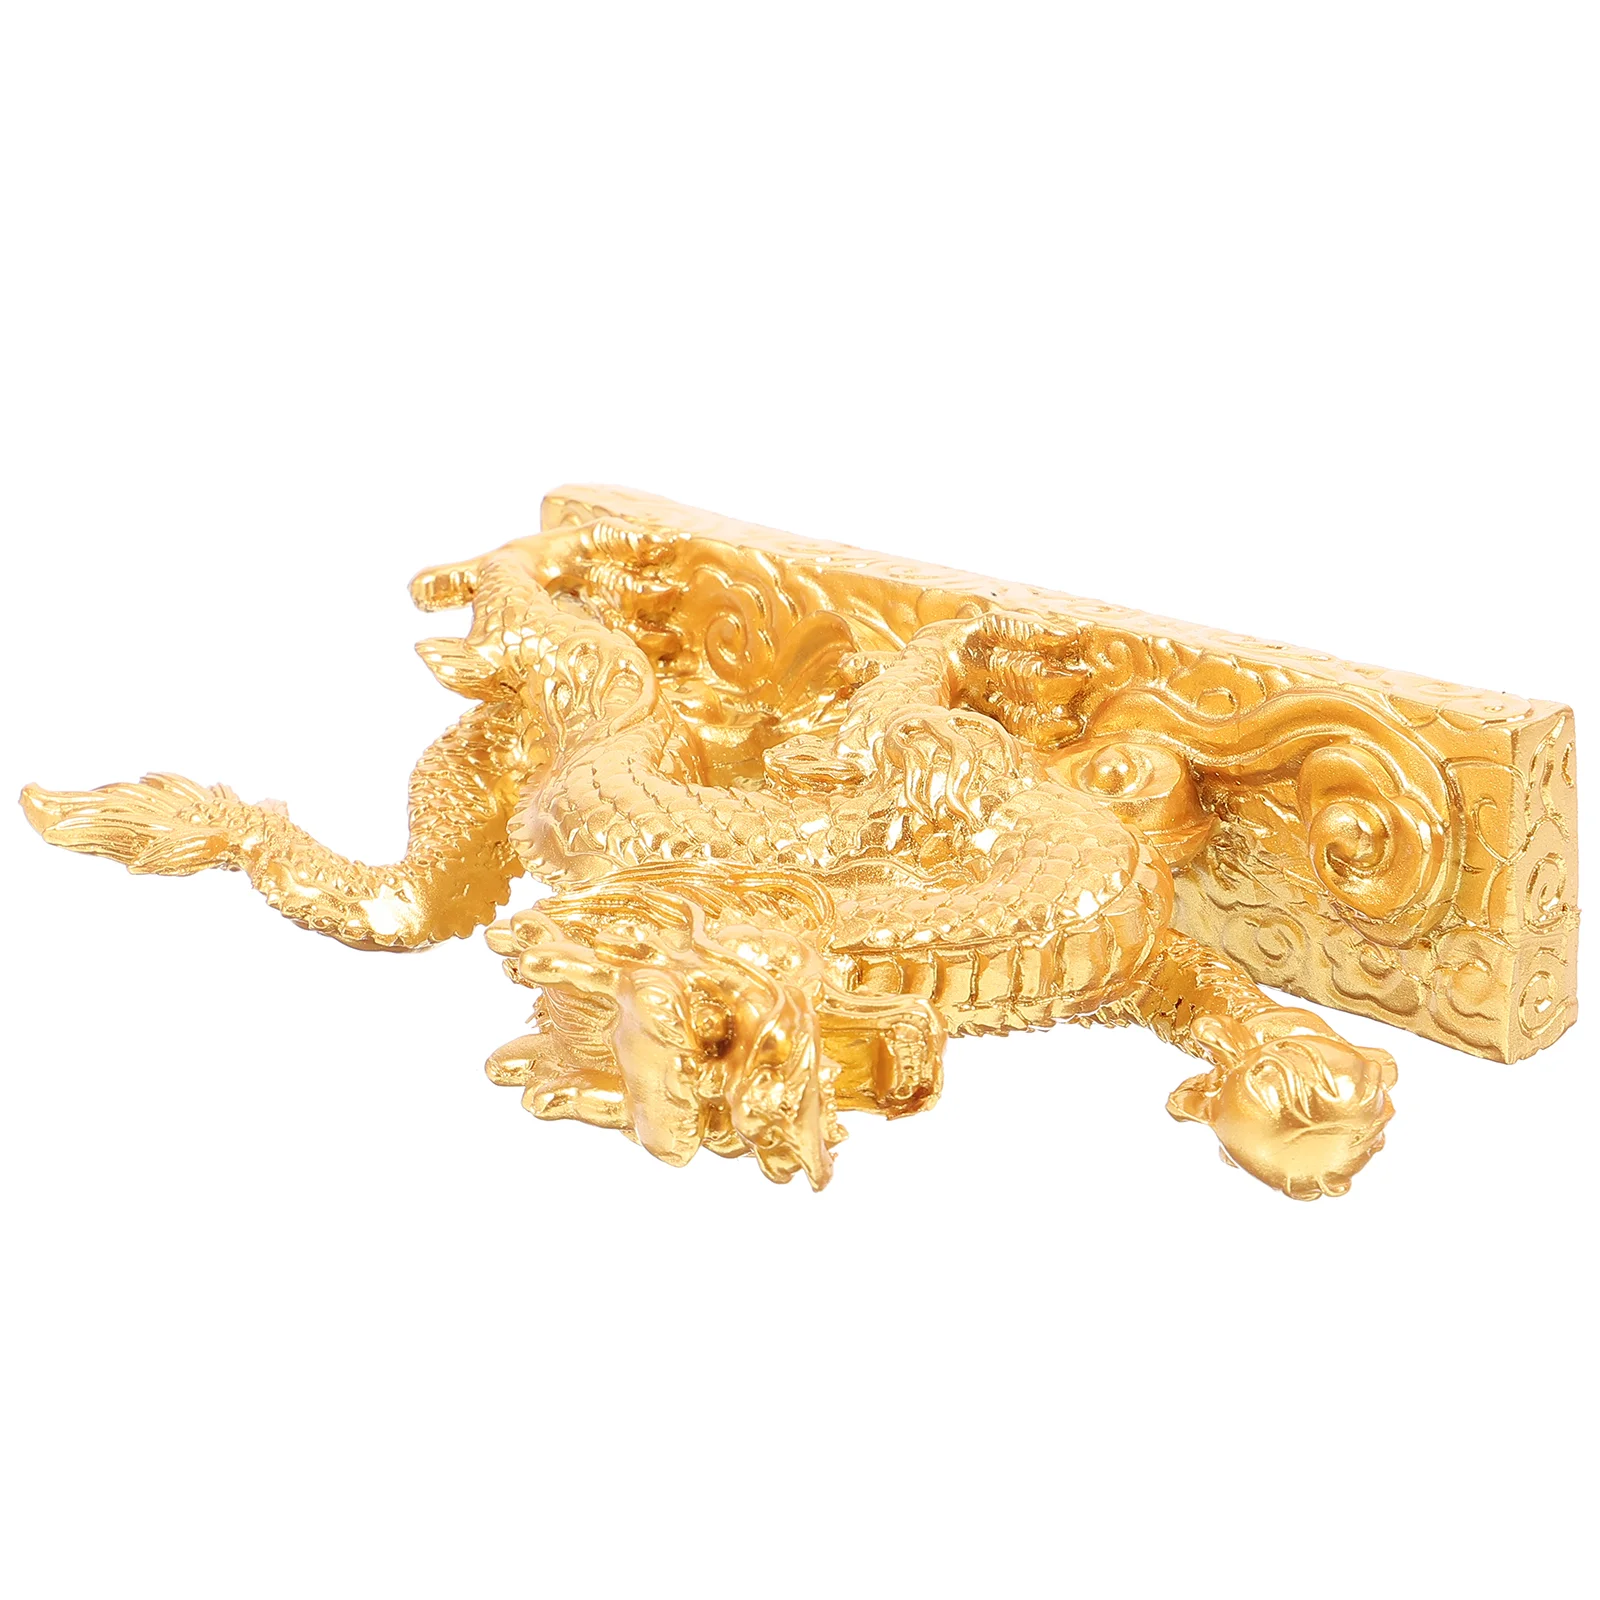 

Desk Dragon Statue Wealth Prosperity Ornament Chinese Auspicious Dragon Figurine Office Home Attract Wealth Good Luck Gifts